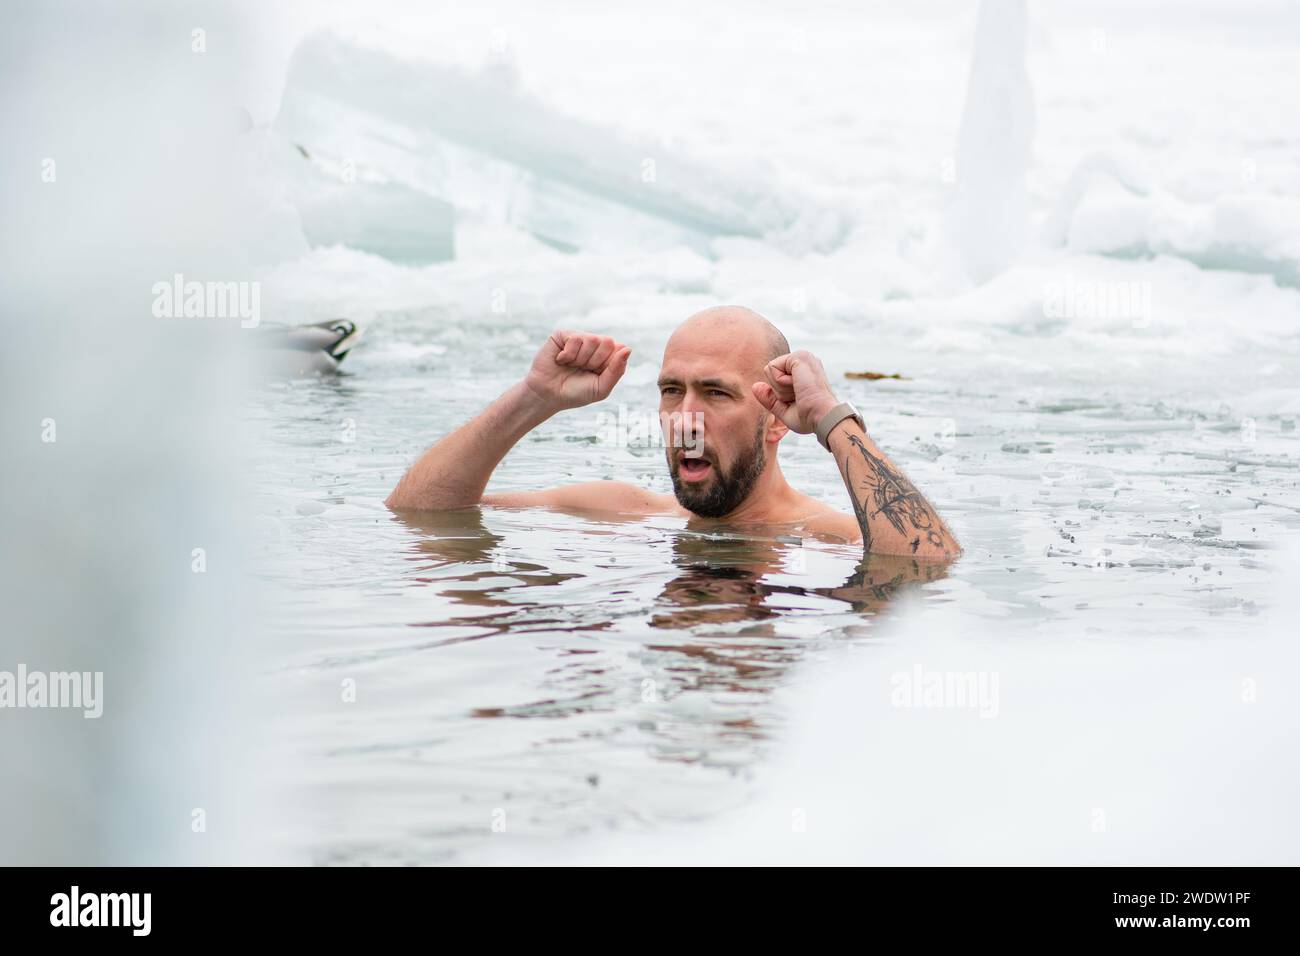 Handsome boy or man ice bathing in the freezing cold water of a frozen lake among ducks. Wim Hof Method, cold therapy, breathing techniques Stock Photo